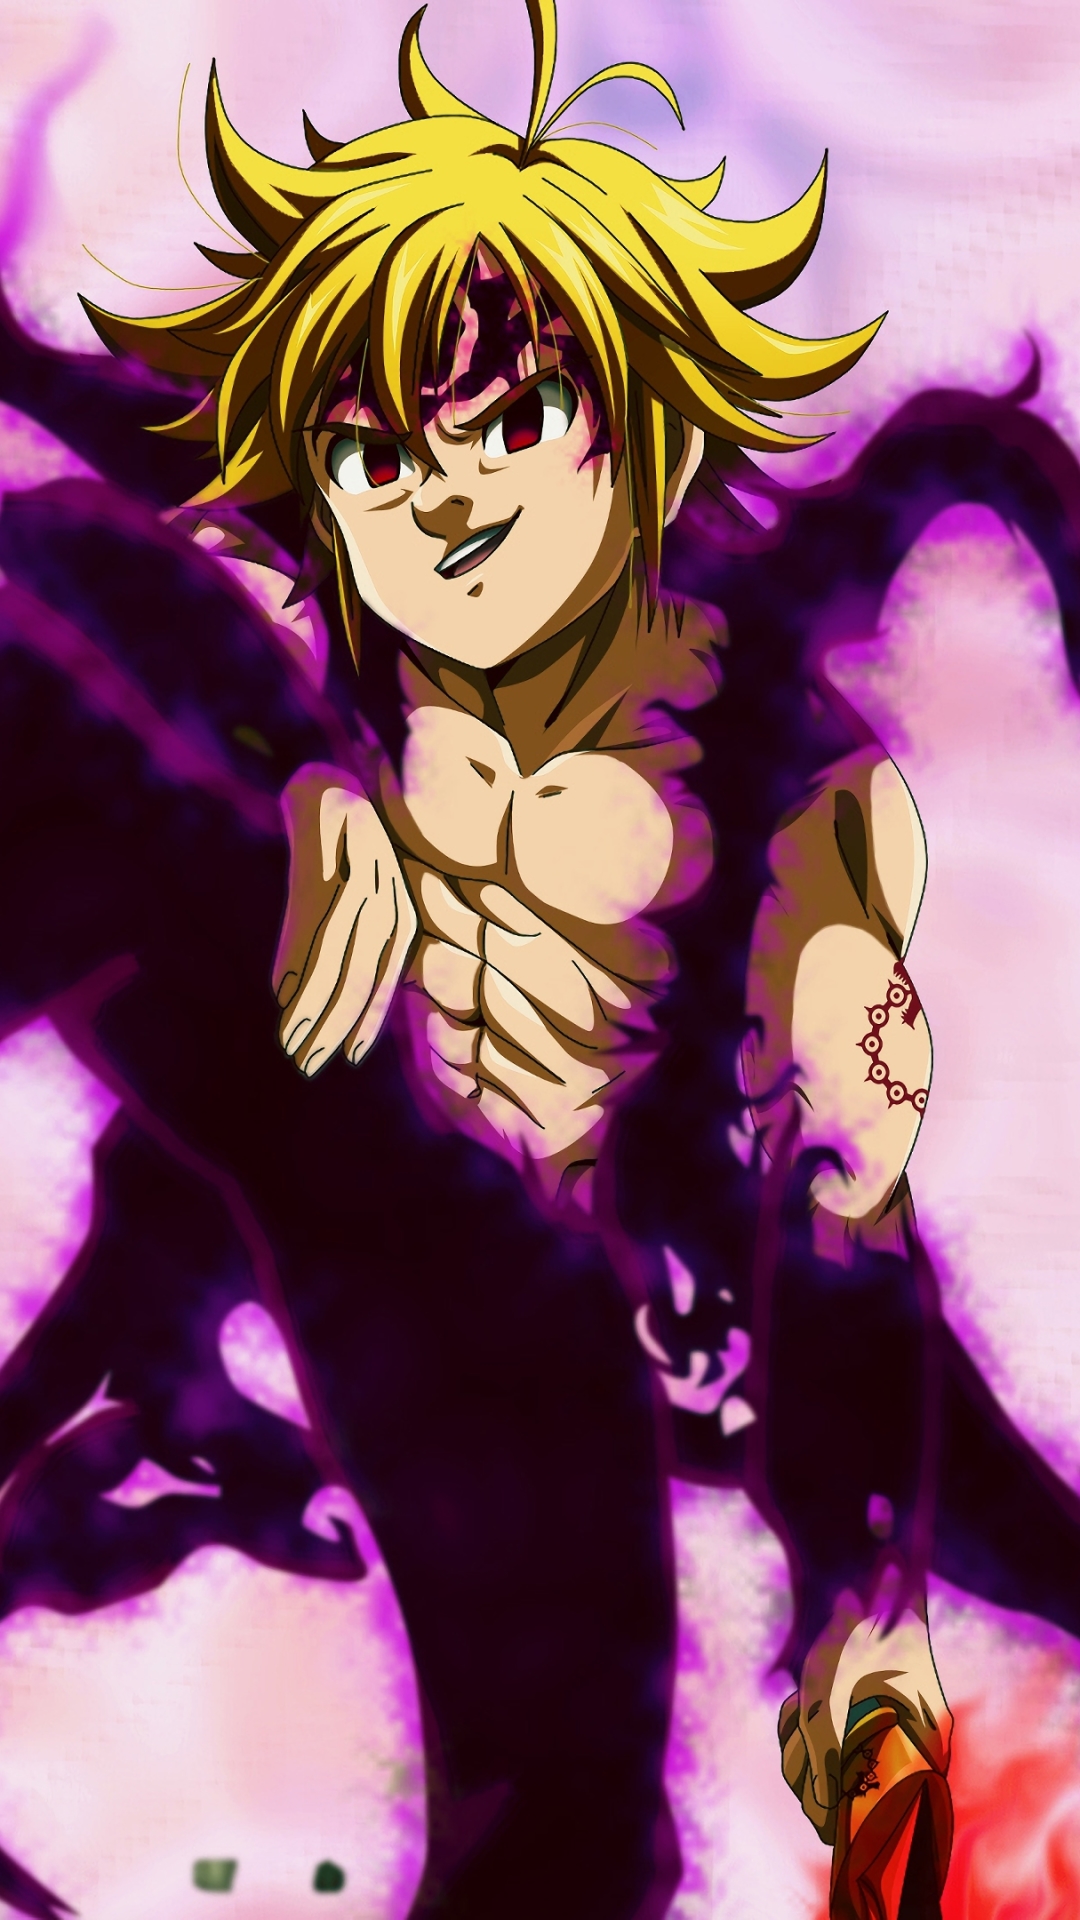 Fate/stay night The Seven Deadly Sins Meliodas Anime music video, Anime,  manga, anime Music Video, fictional Character png | PNGWing